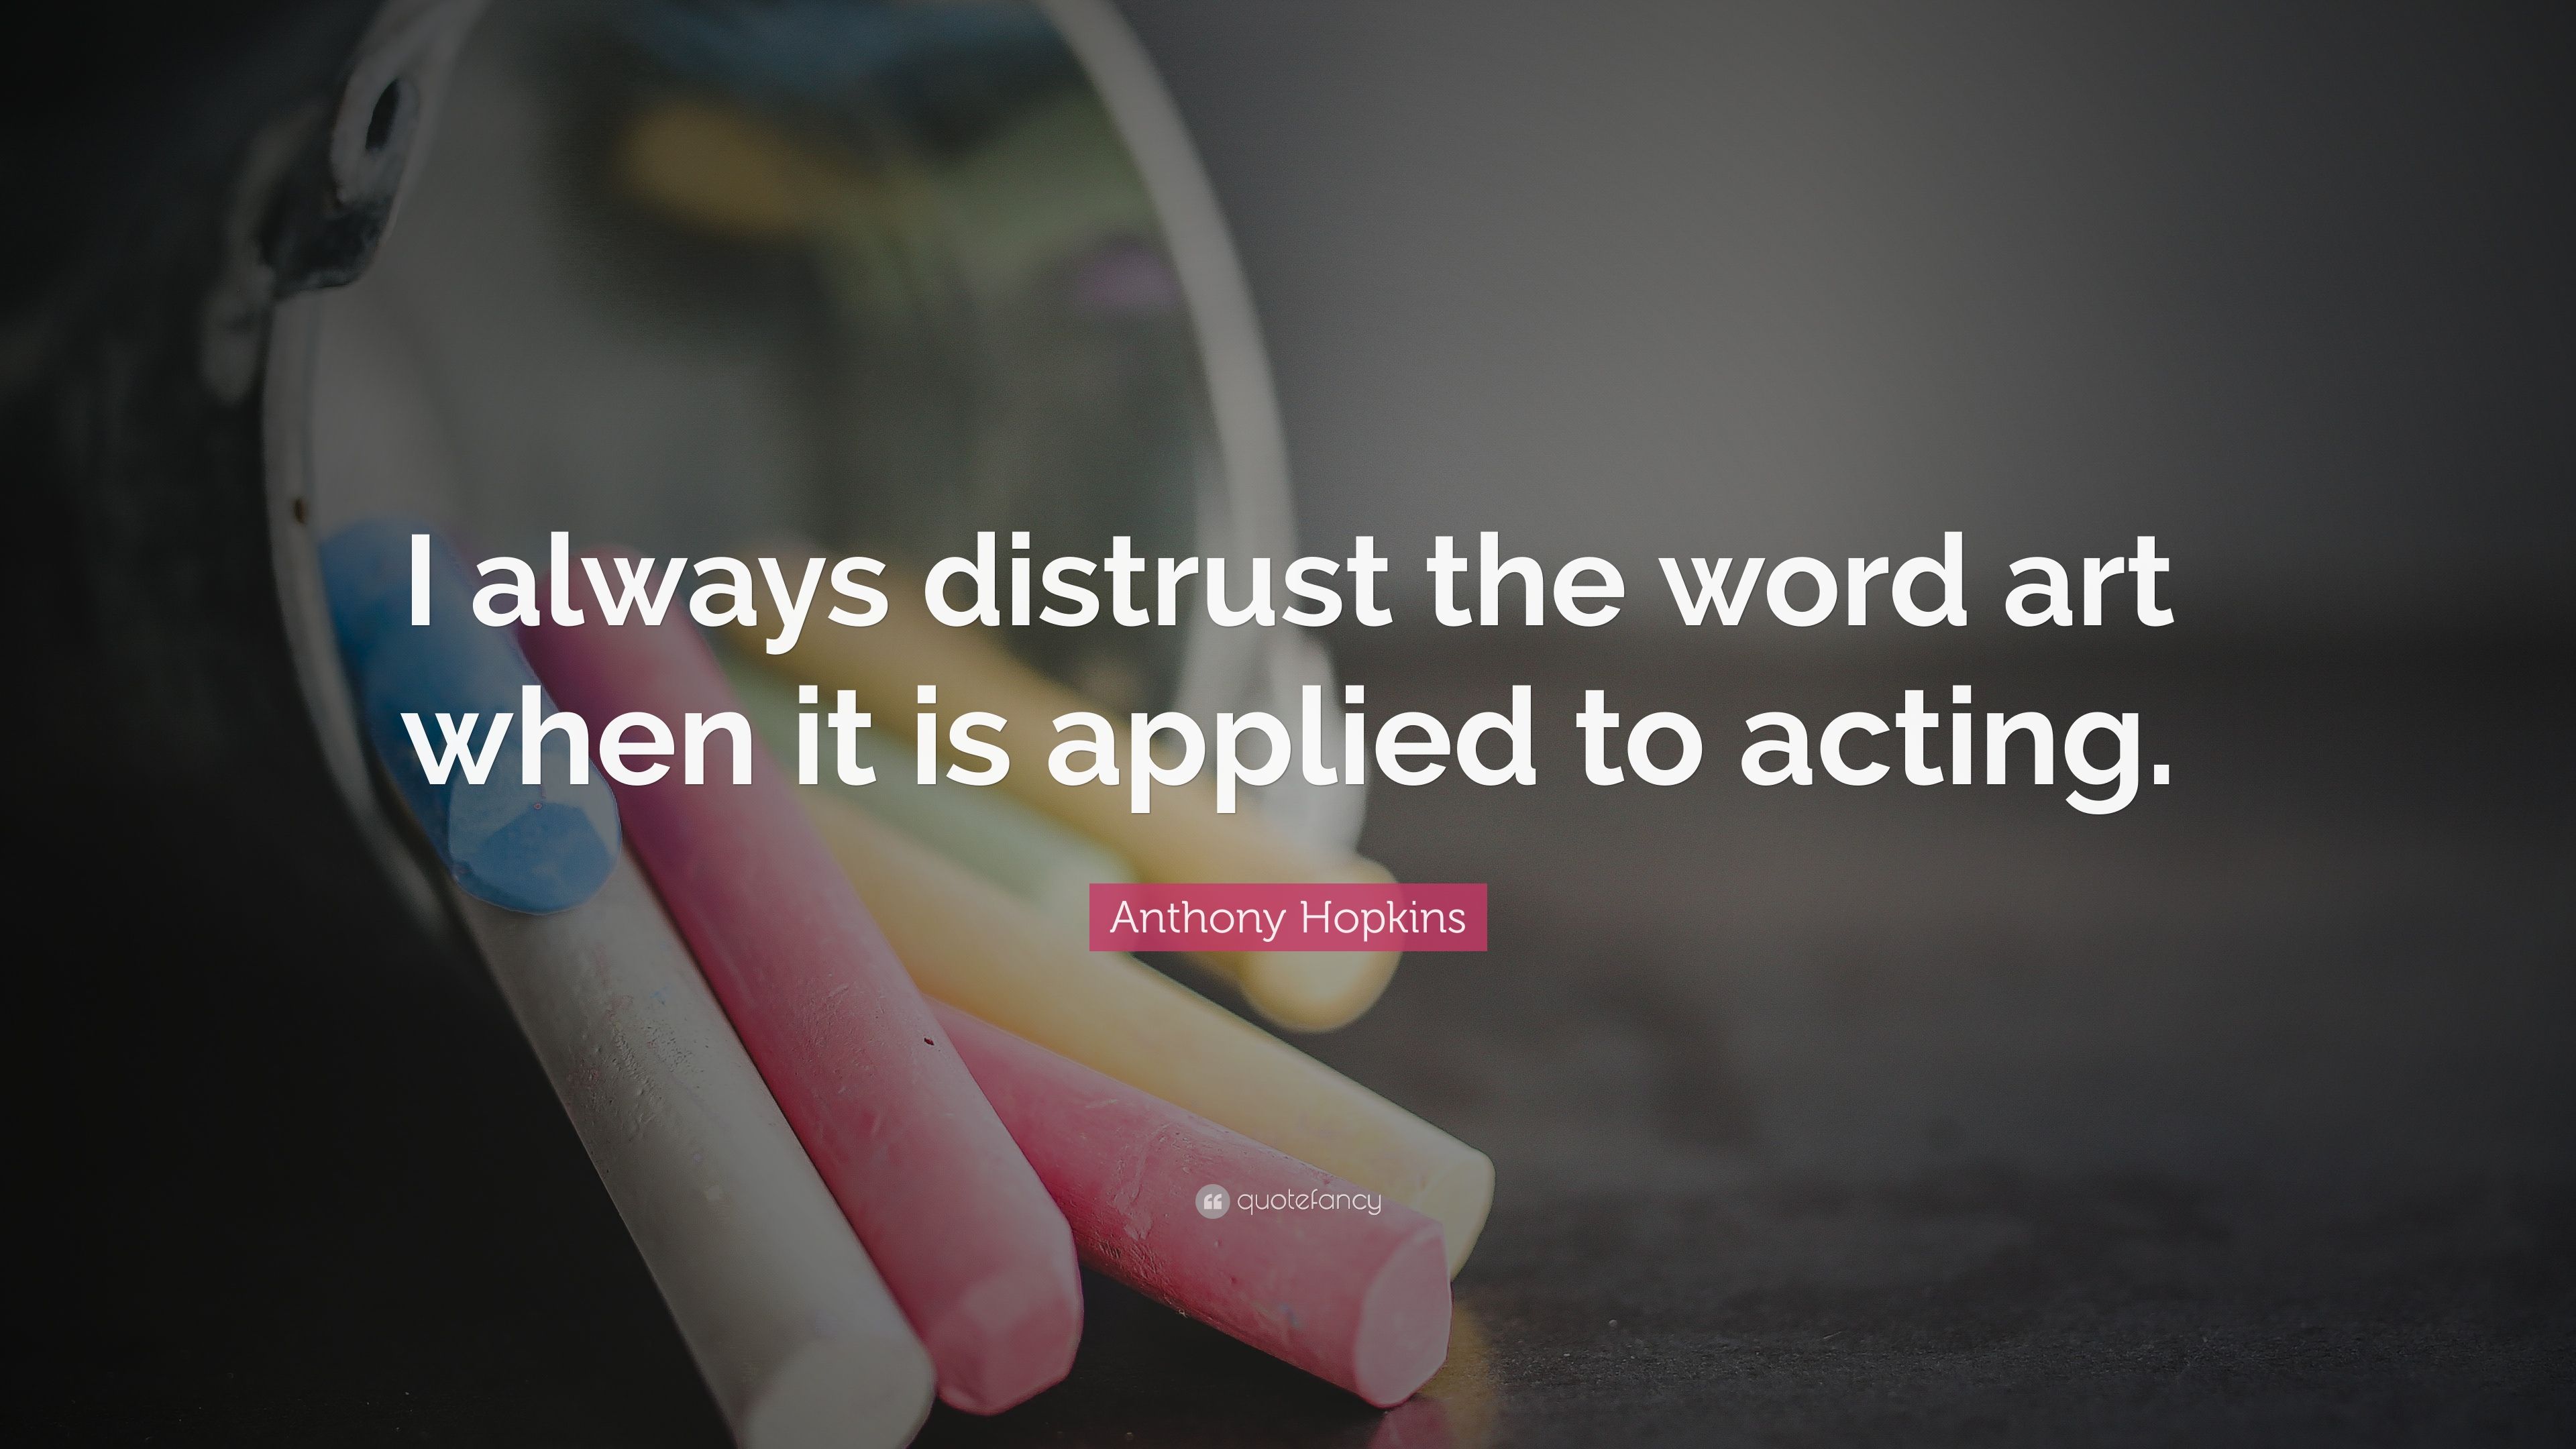 Anthony Hopkins Quote: “I always distrust the word art when it is applied to acting.” (7 wallpaper)